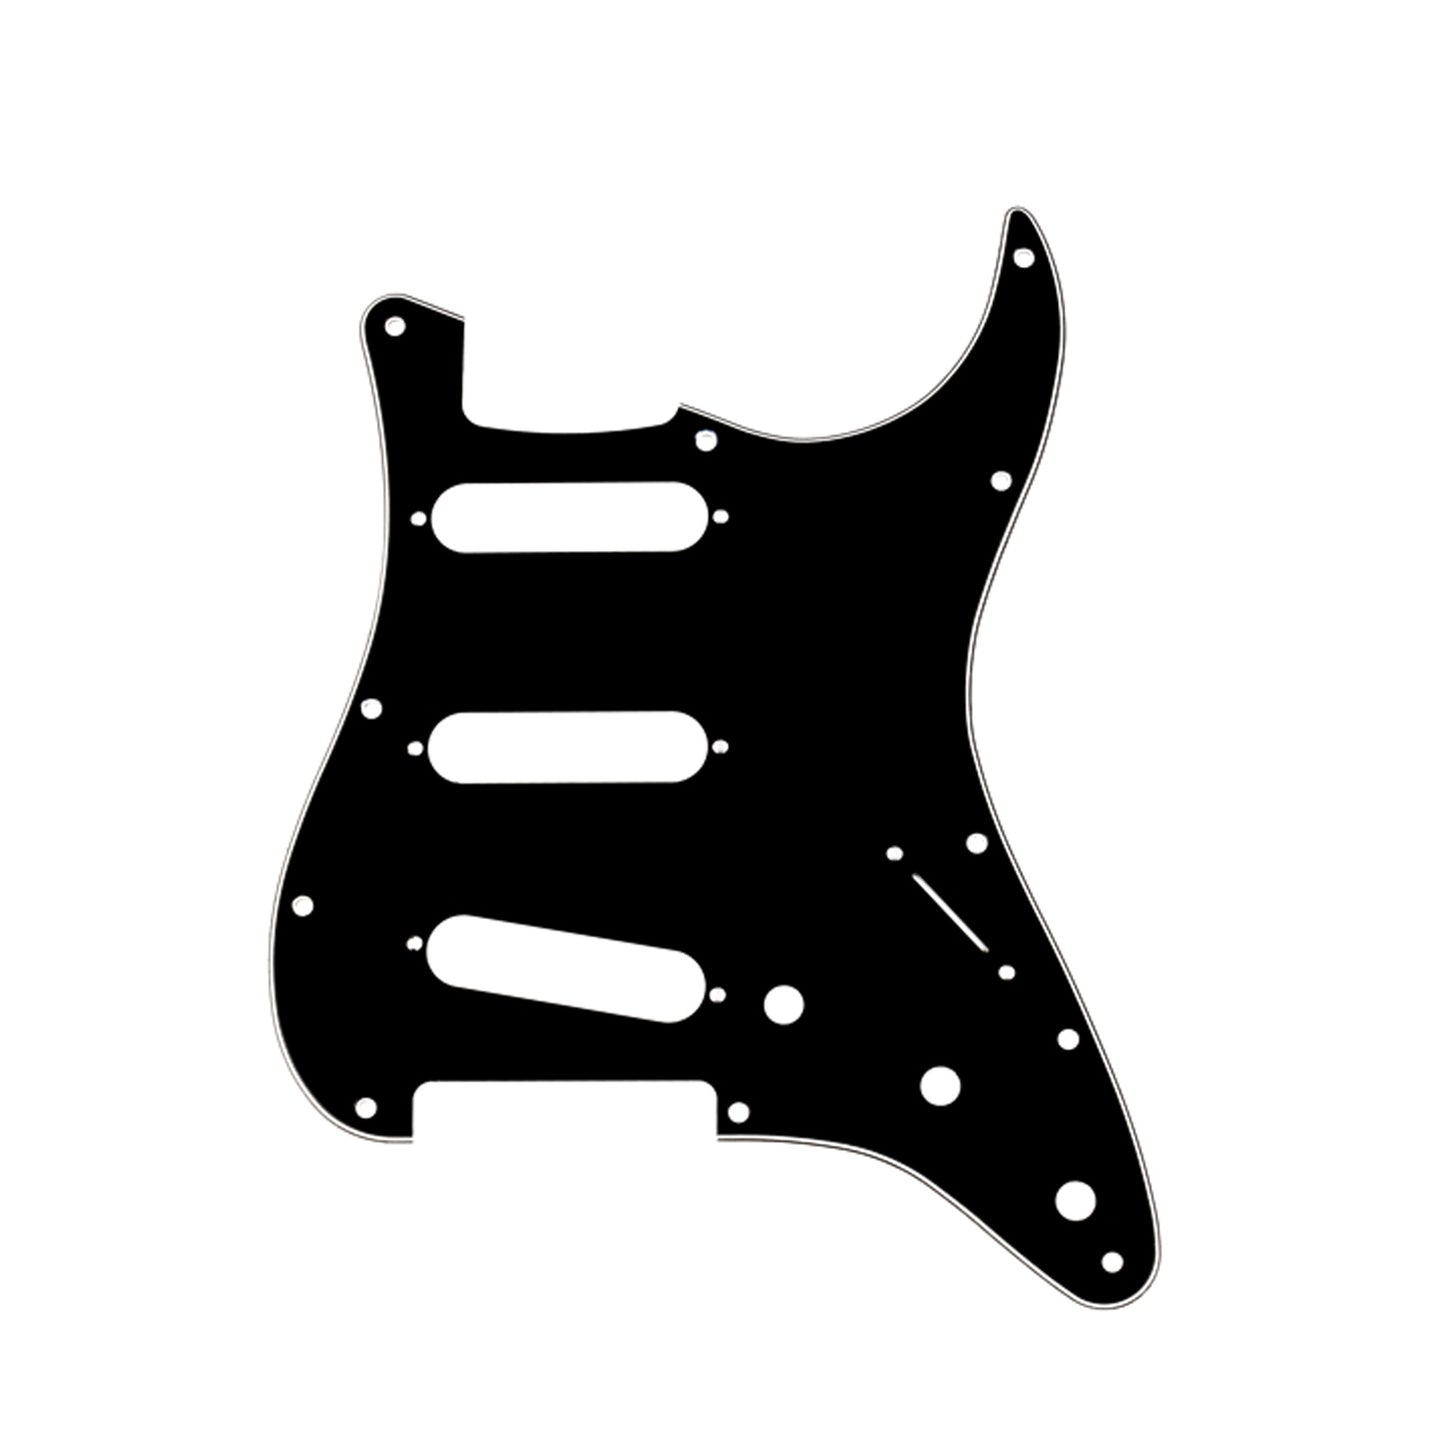 Musiclily SSS 11 Hole Strat Guitar Pickguard for Fender USA/Mexican Made Standard Stratocaster Modern Style, 3Ply Black